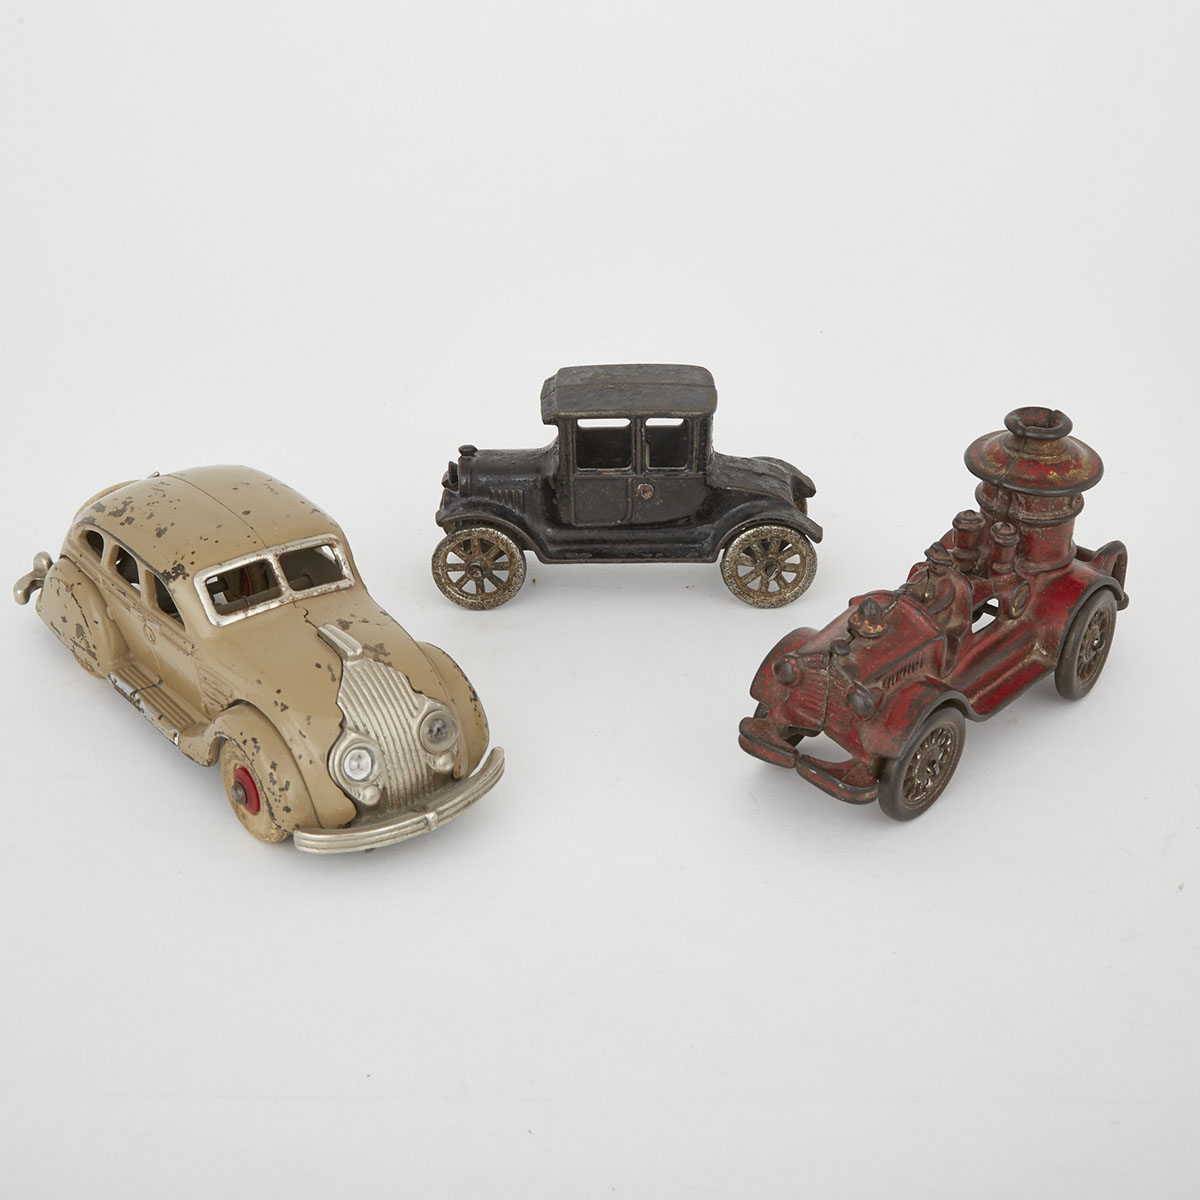 Three American Painted Cast Iron Toy Vehicles, early 20th century